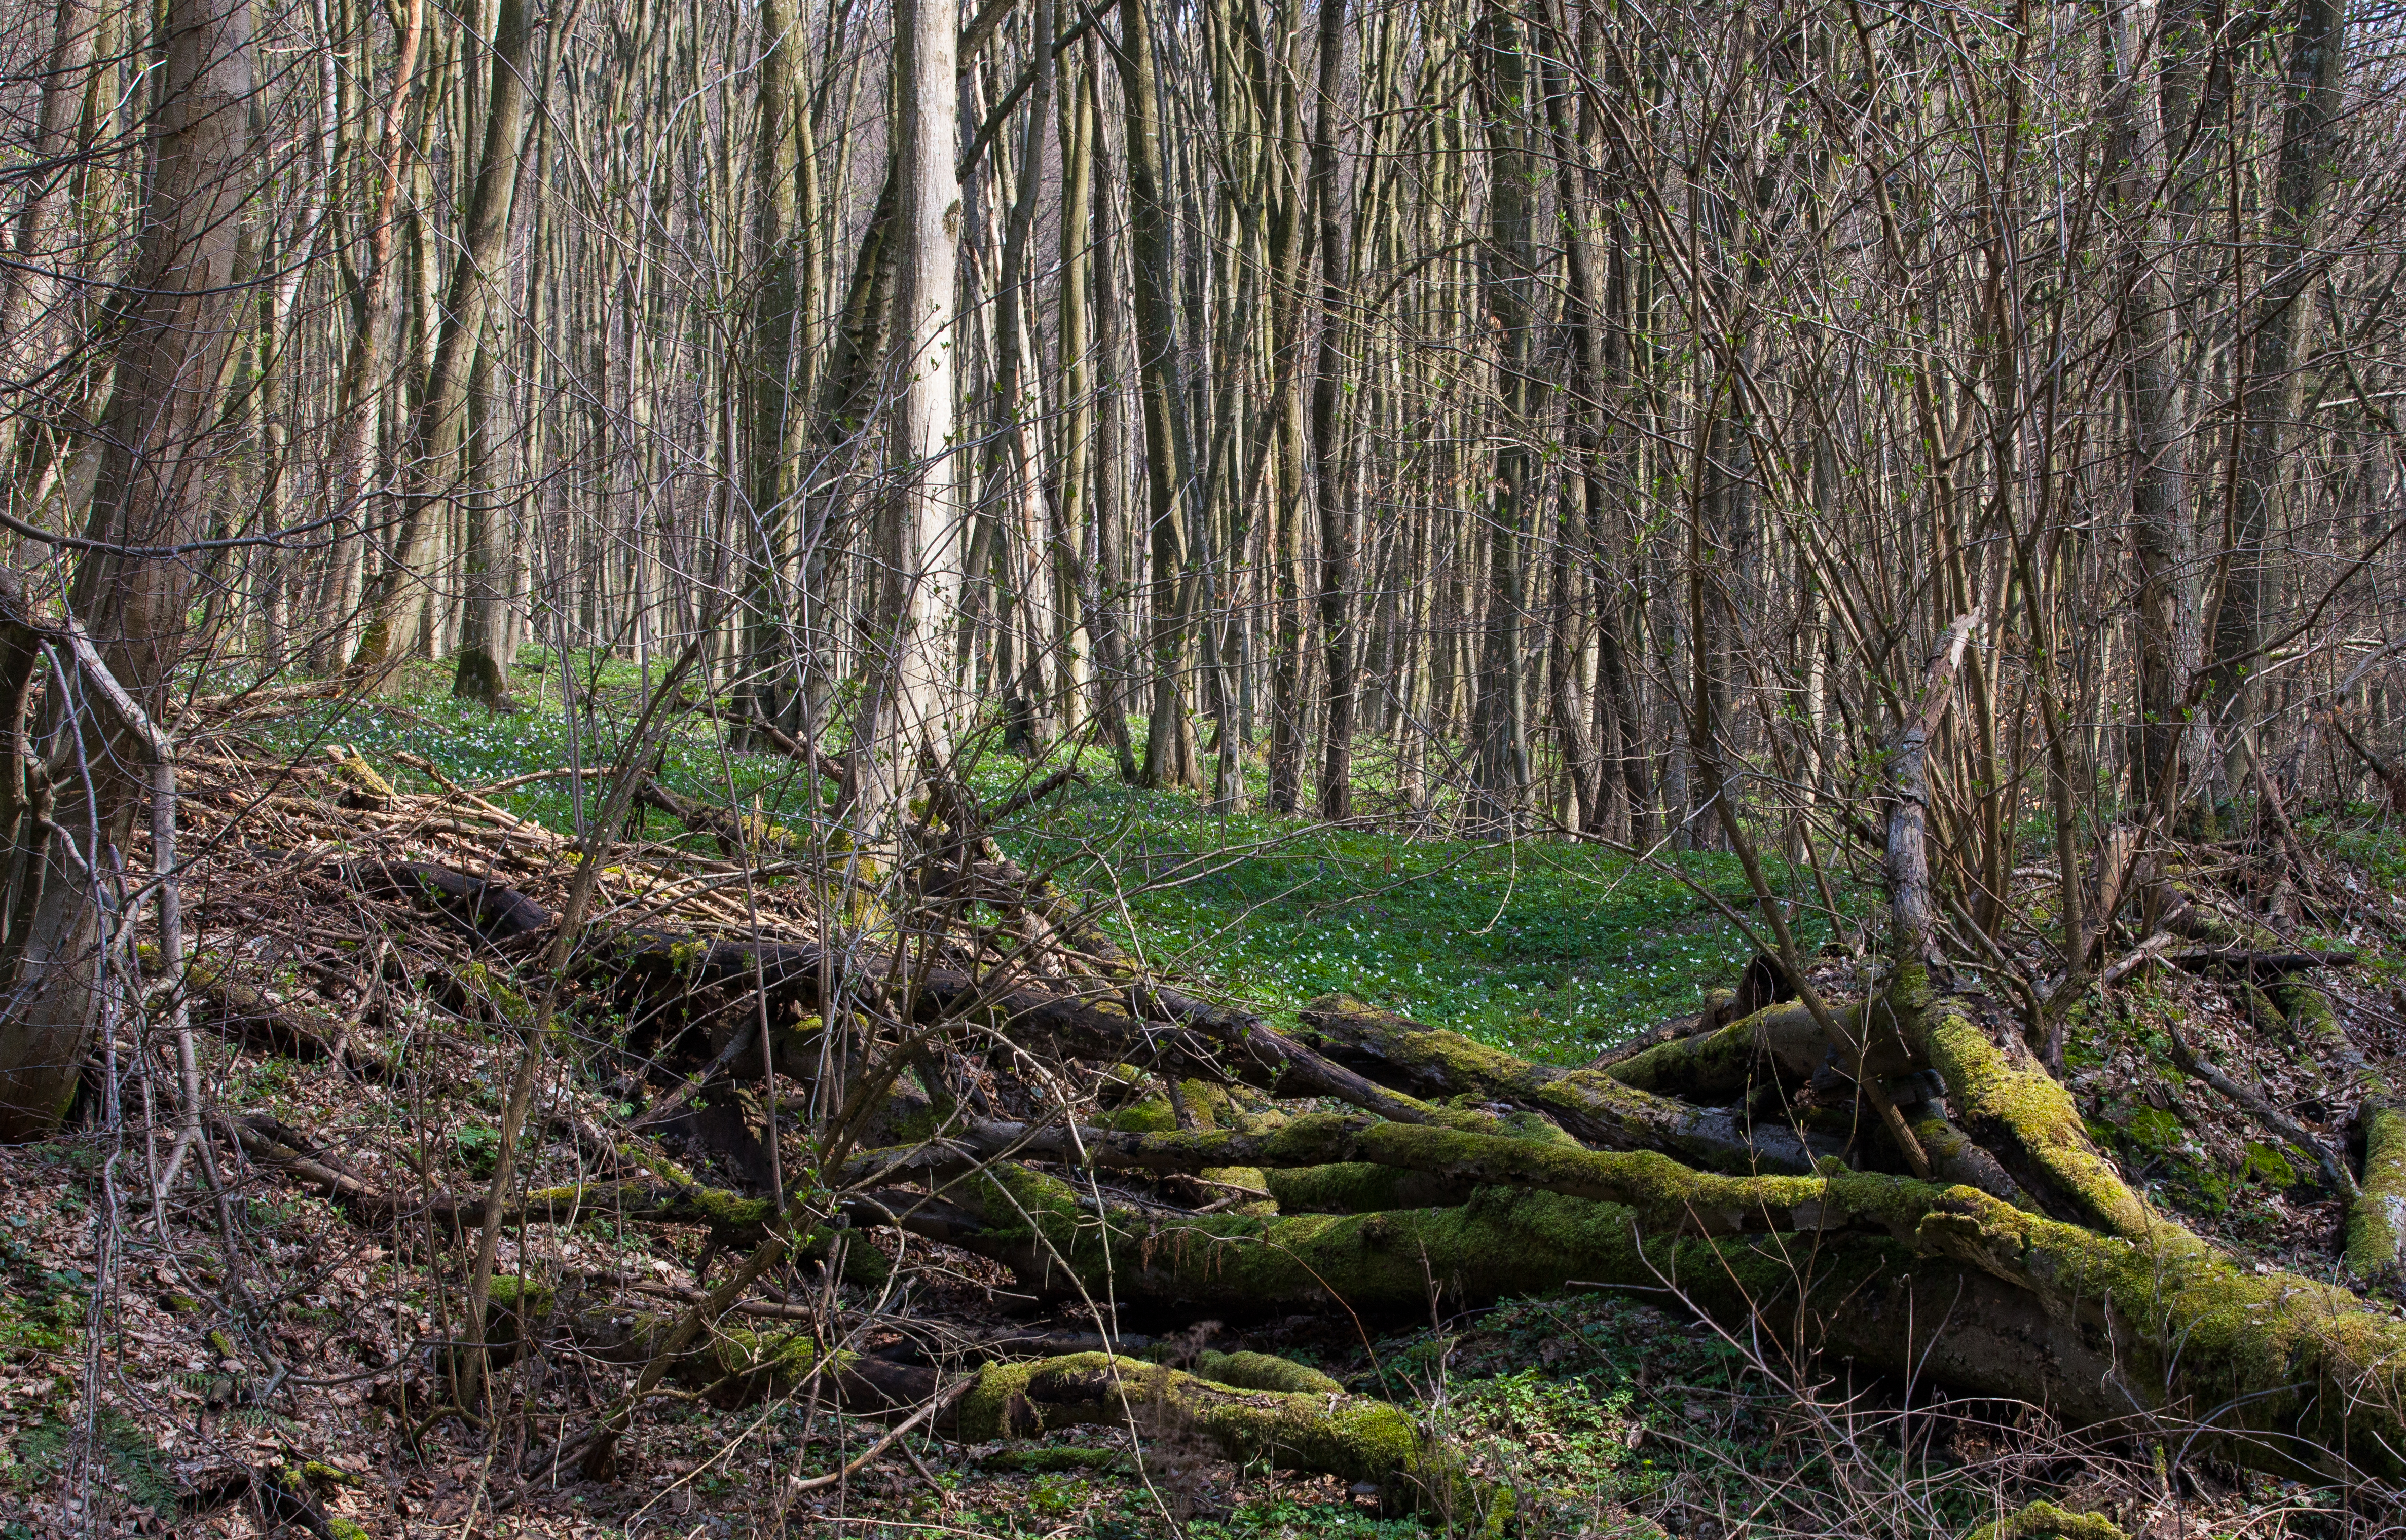 a forest in Lviv region of Ukraine in March 2014